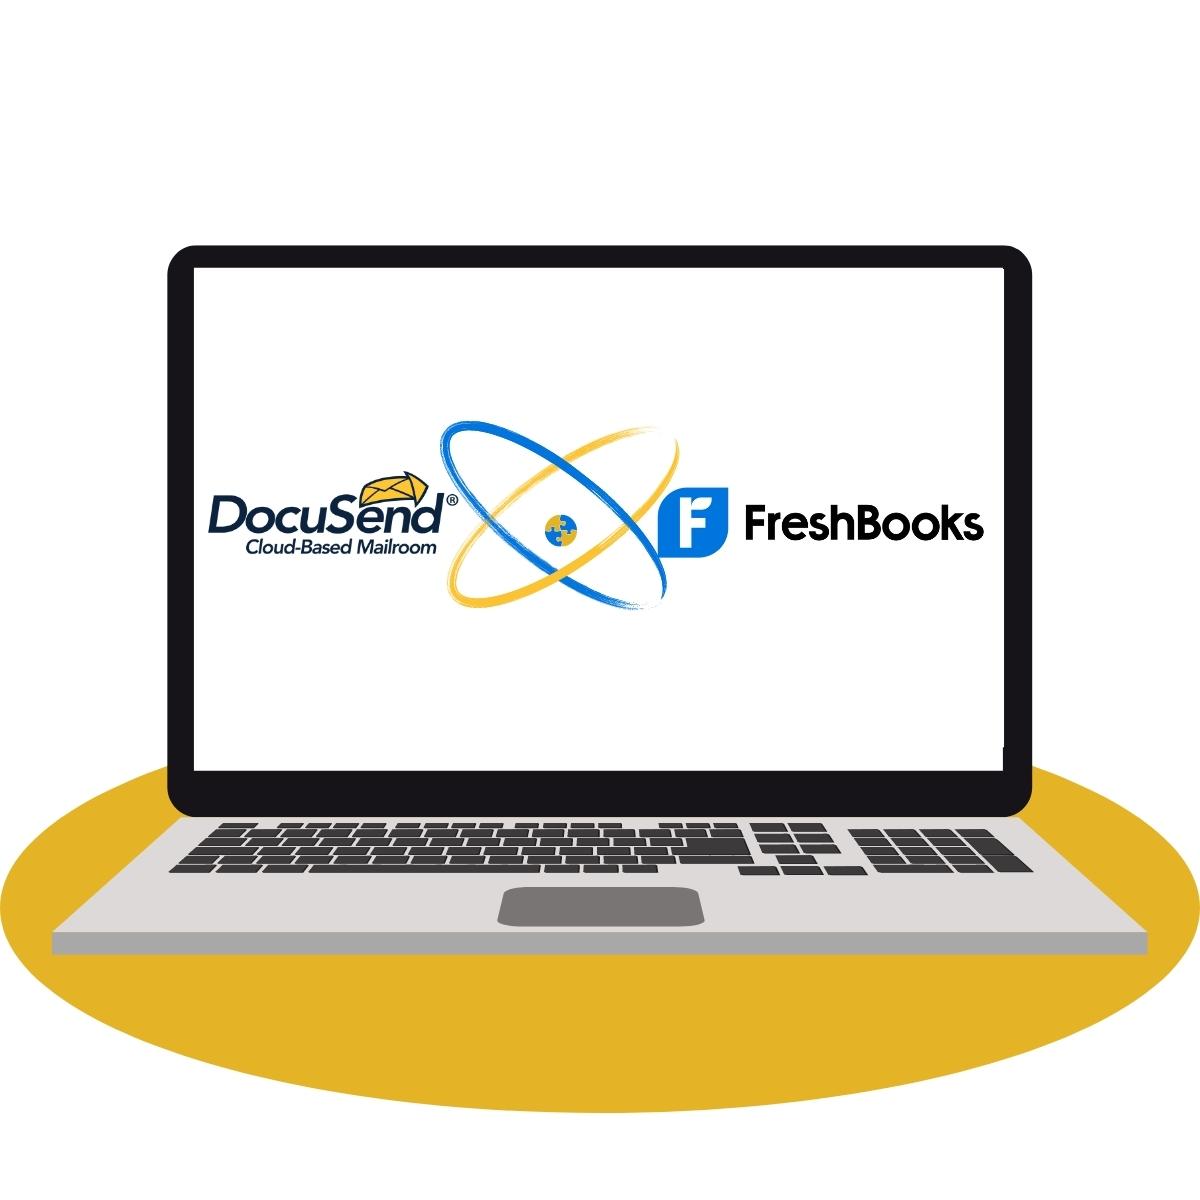 Connect with DocuSend and Mail from FreshBooks